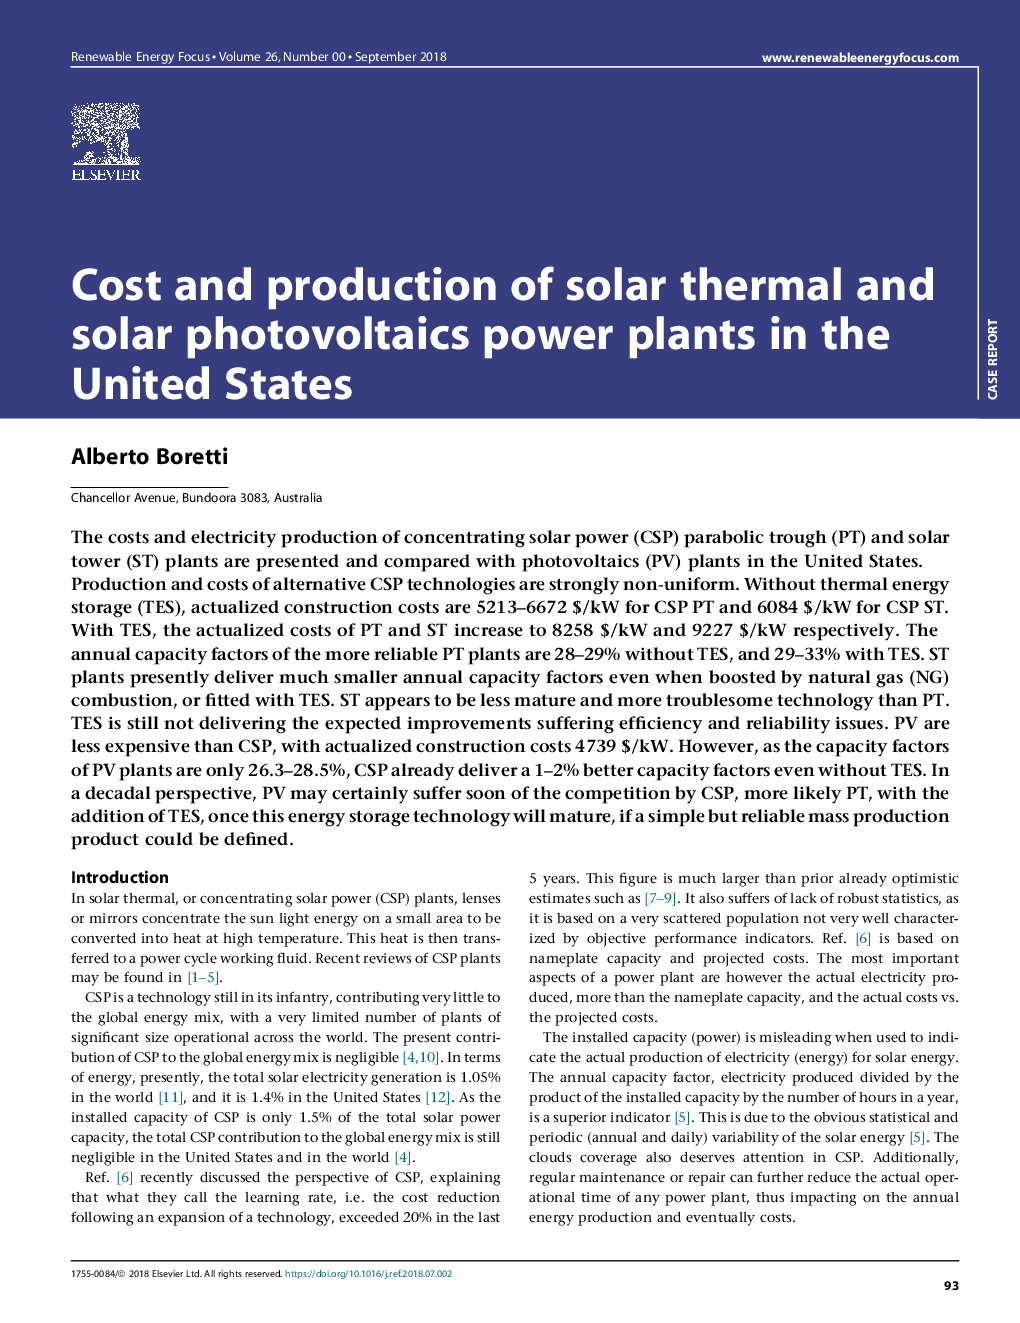 Cost and production of solar thermal and solar photovoltaics power plants in the United States